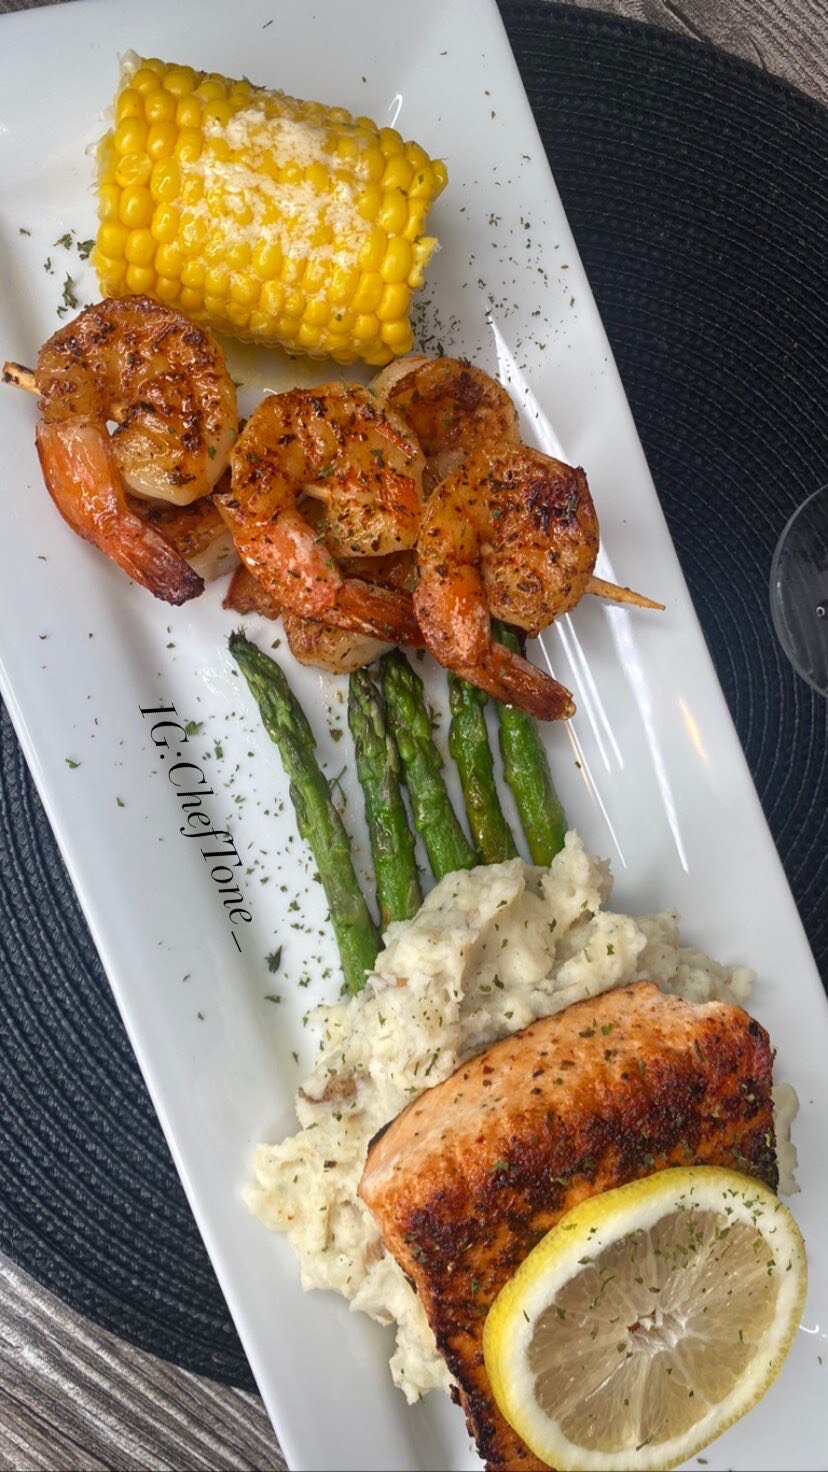 A salmon and shrimp dish made by Chef Tone Wilson.